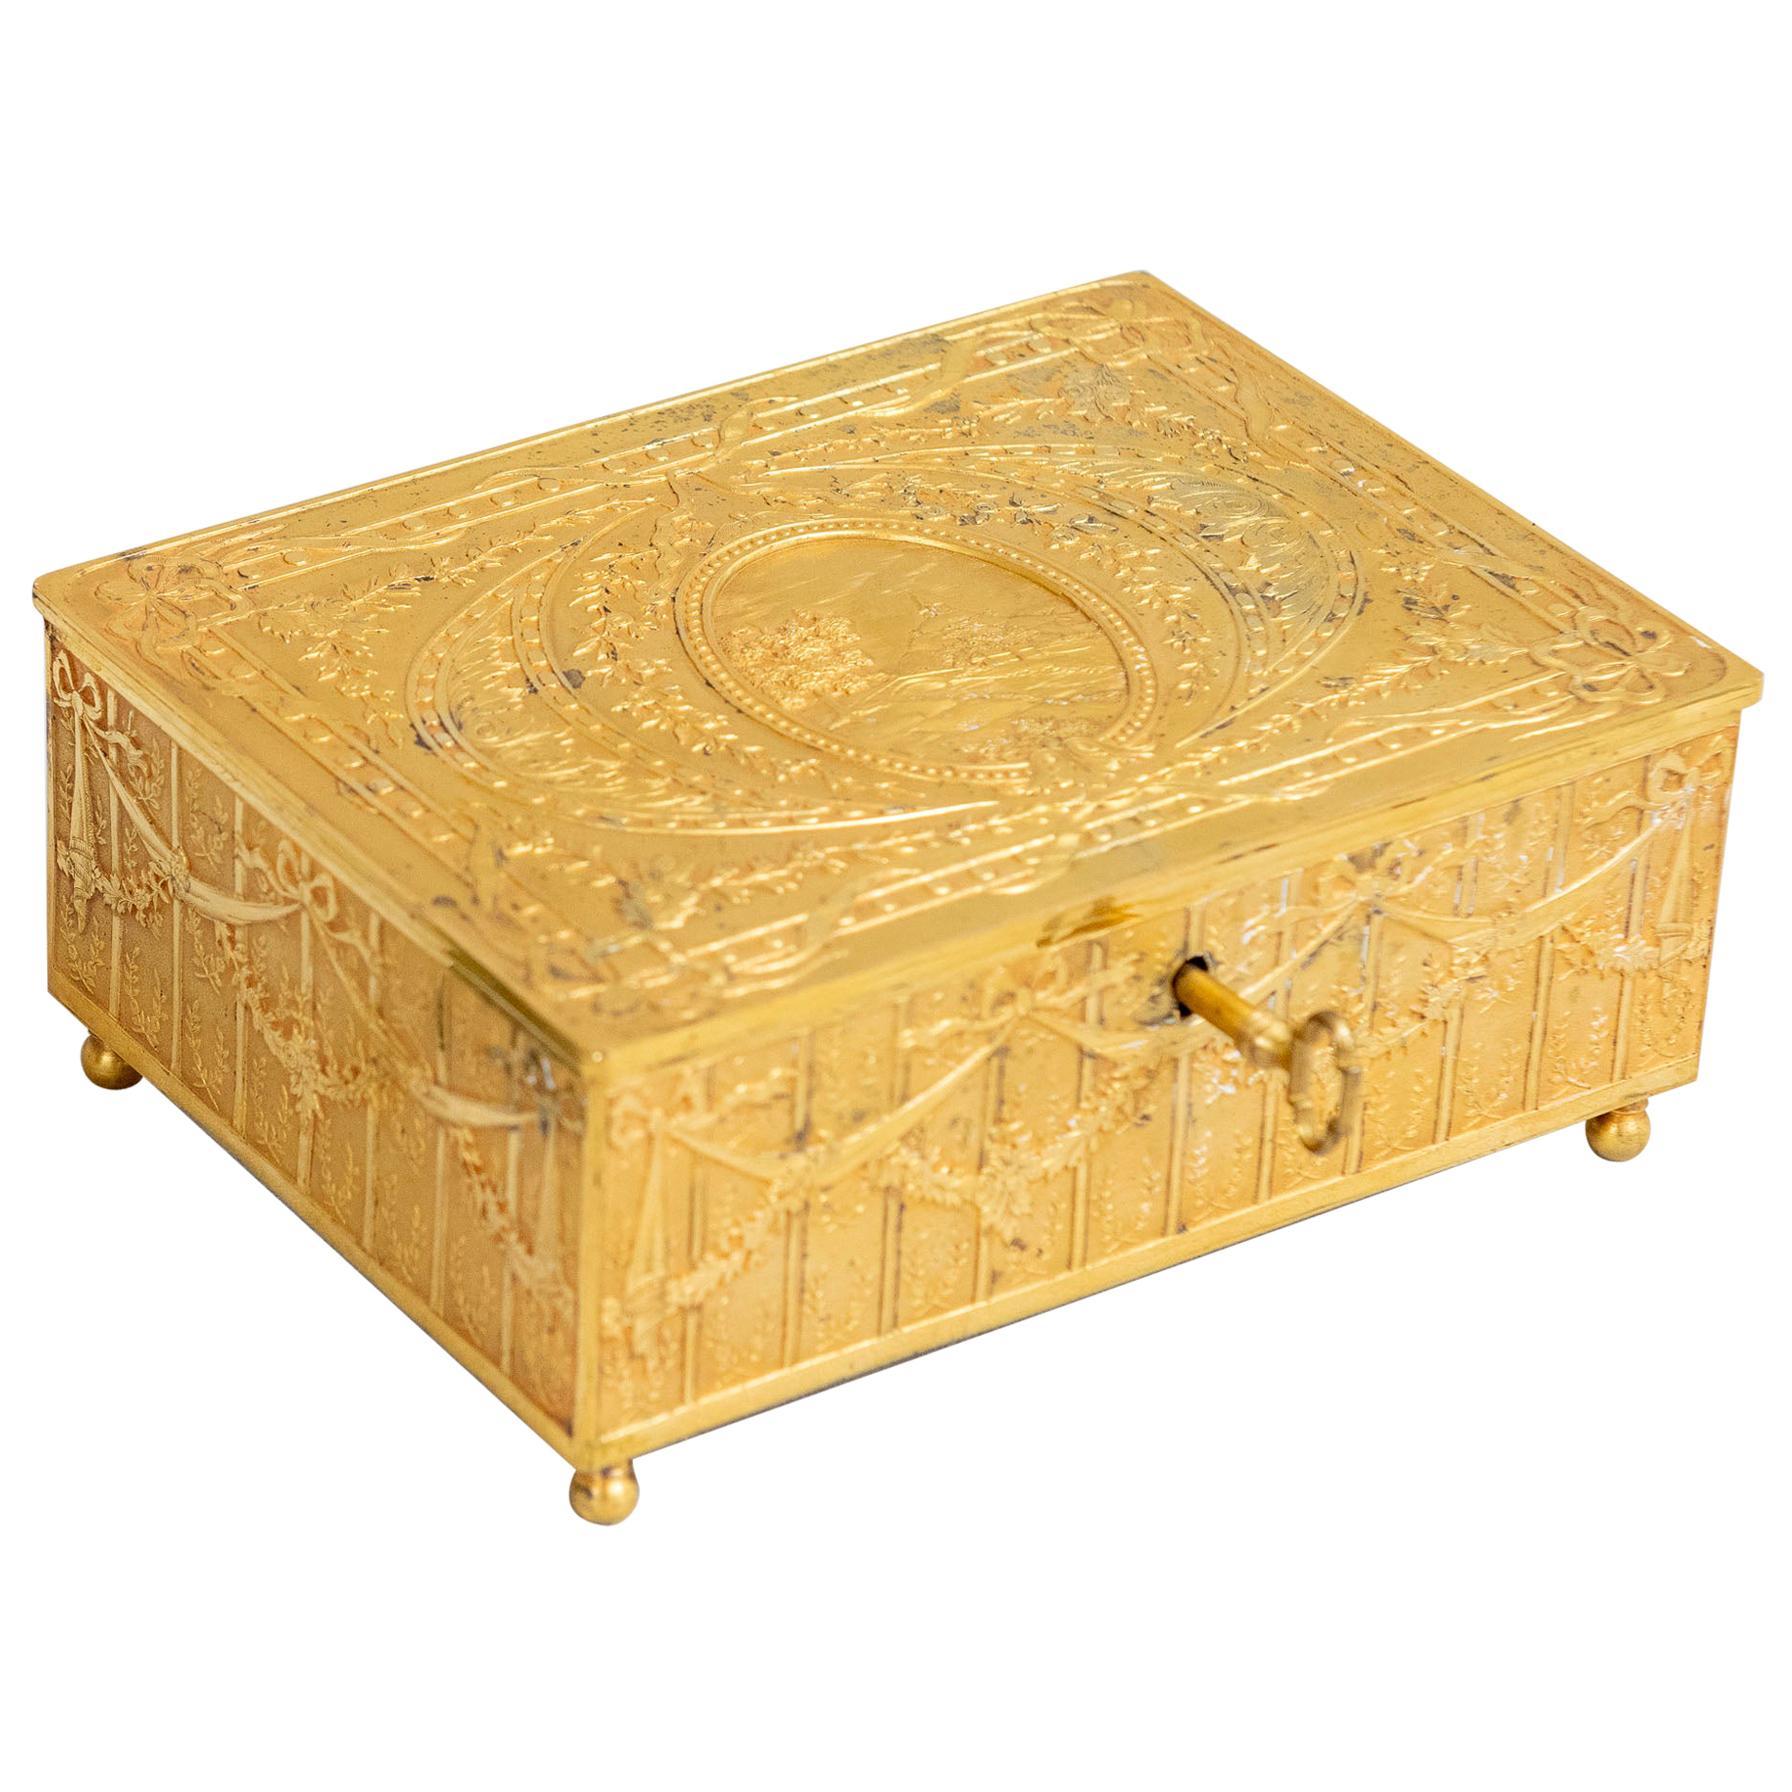 French Gilt Bronze Jewelry Box circa 1900 with Original Key Neoclassical Revival